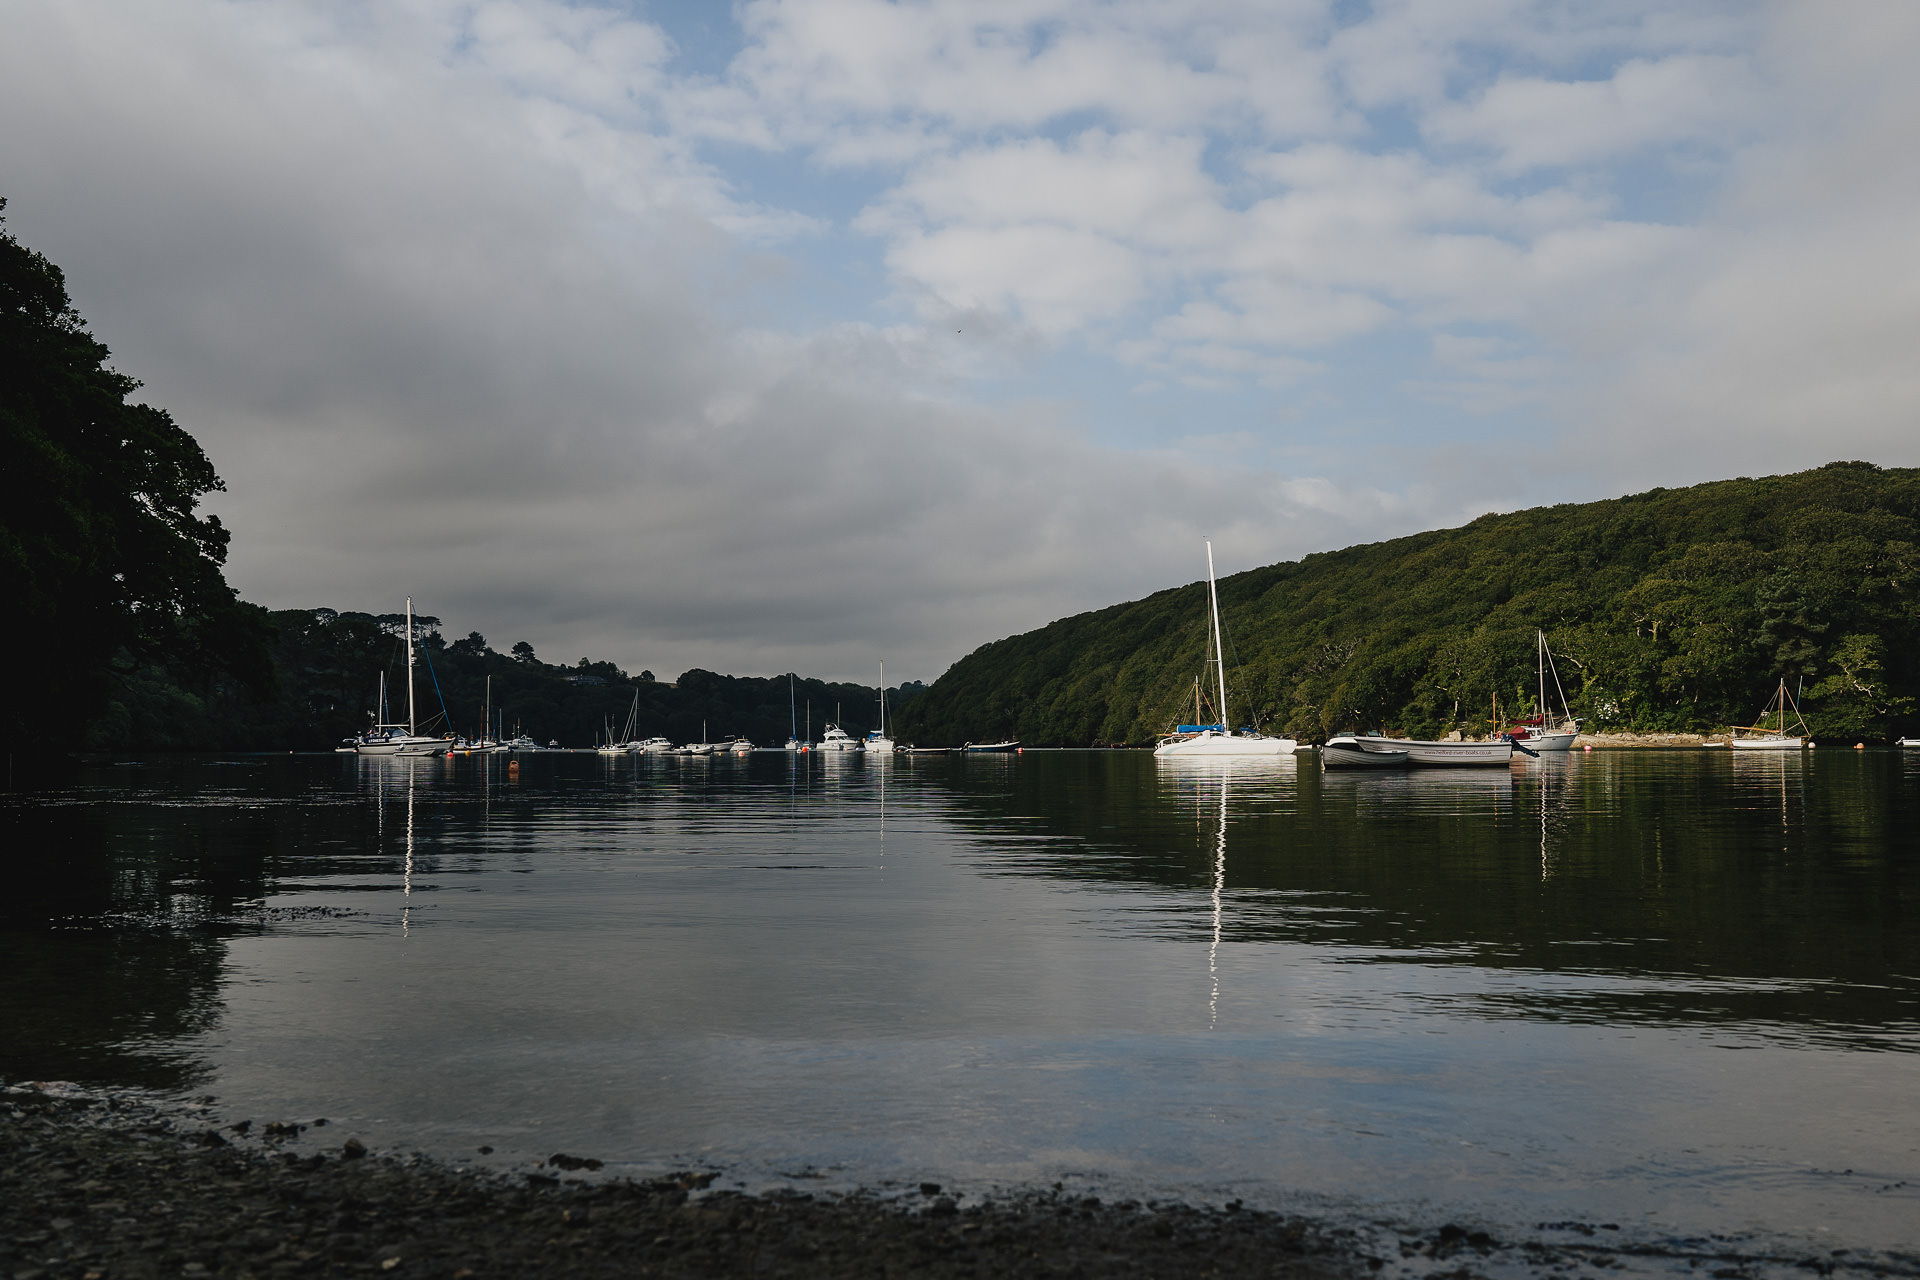 Boats on the River Helford in Cornwall